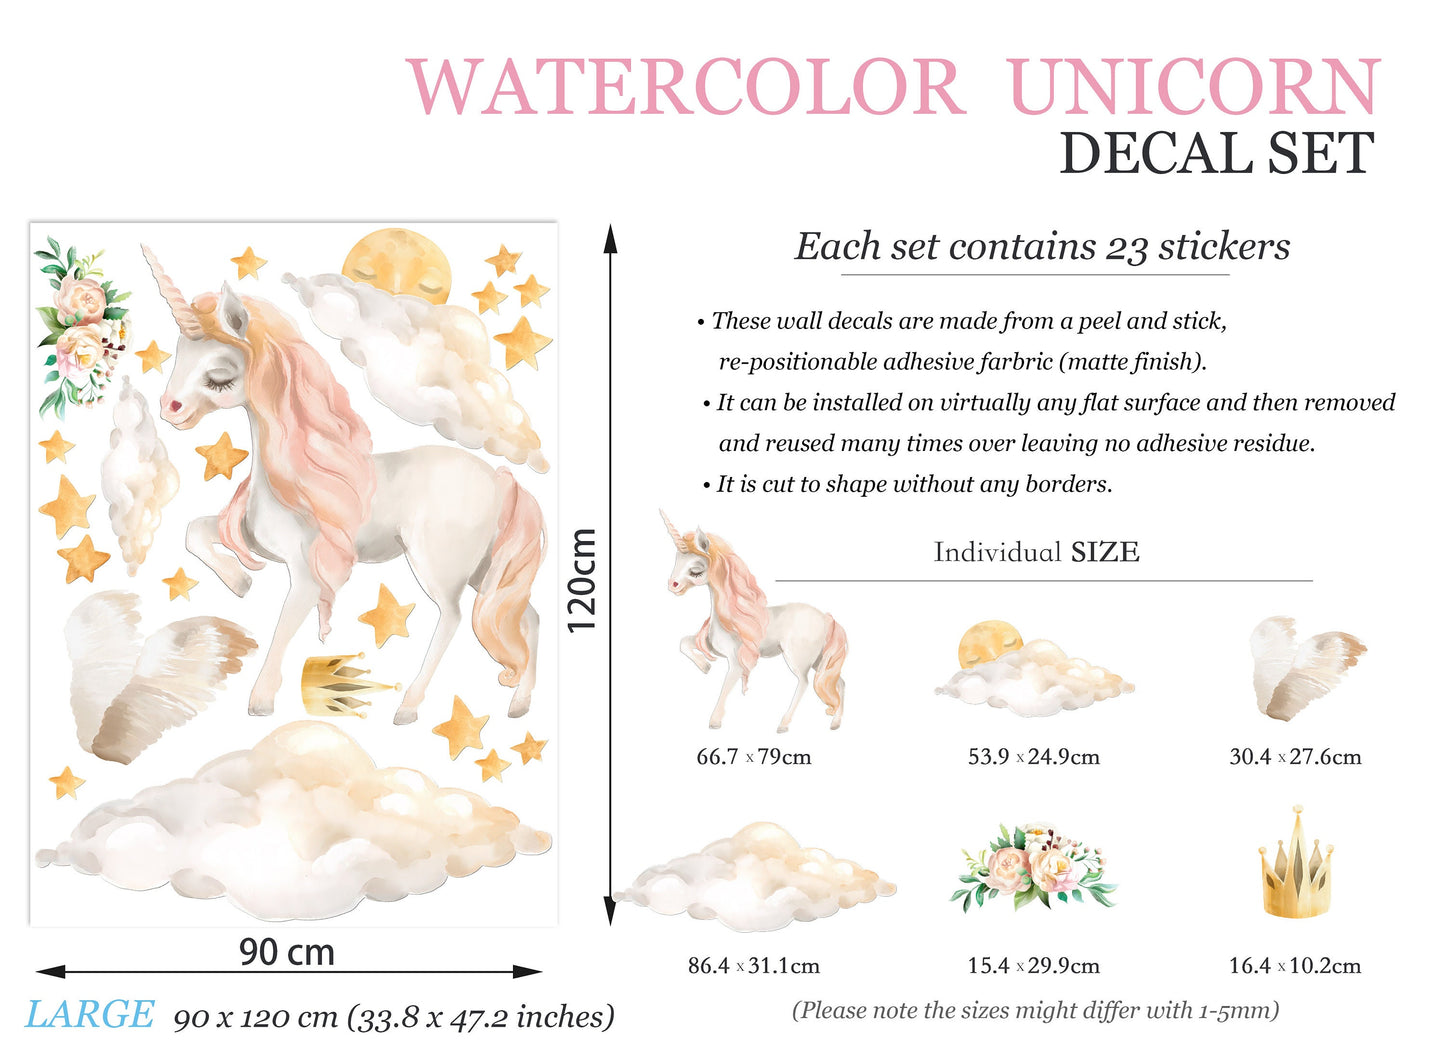 Dancing Unicorn Stroll at Starry Sky Wall Decal - Girl Room Decor - Removable Peel and Stick - BR110